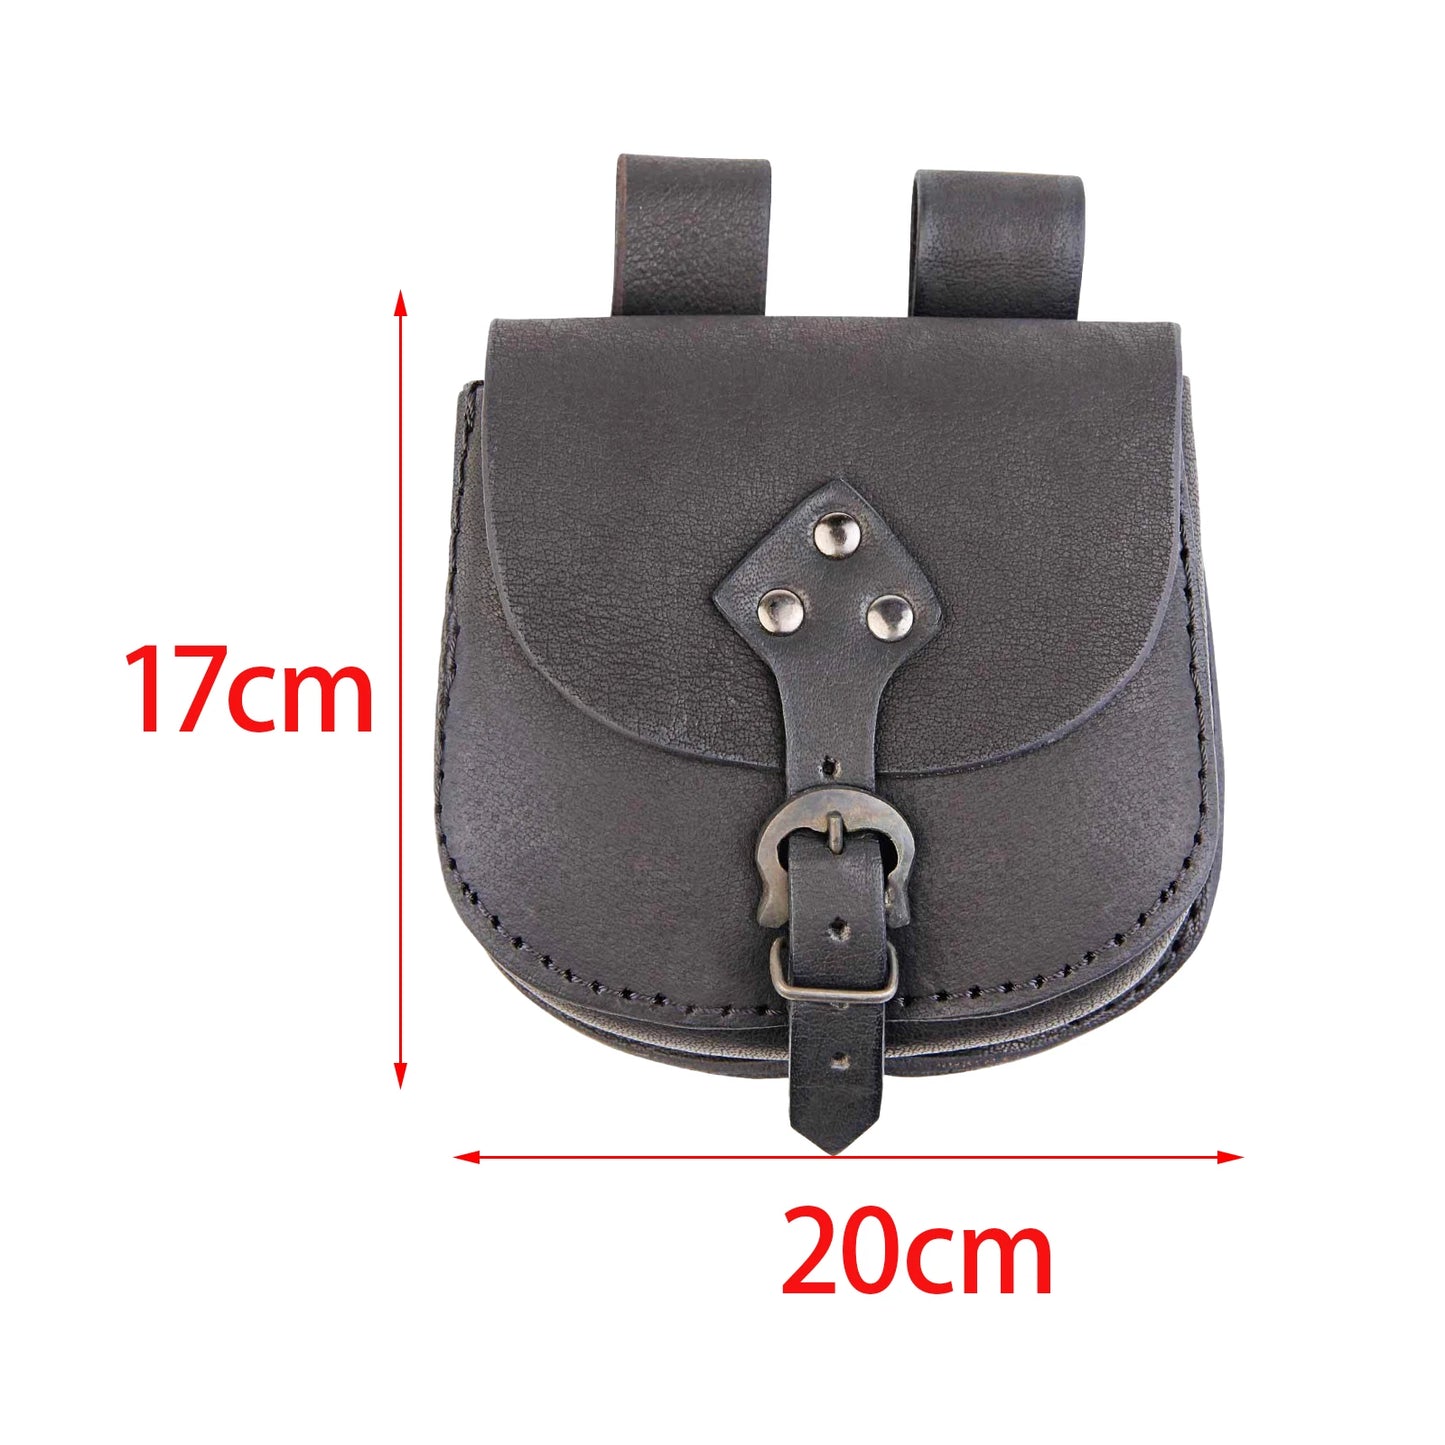 Medieval Waist Bag Purse Steampunk Fanny Pack PU Leather Belt Pouch Waist Pack for Stage Show Men Party Role Playing Women